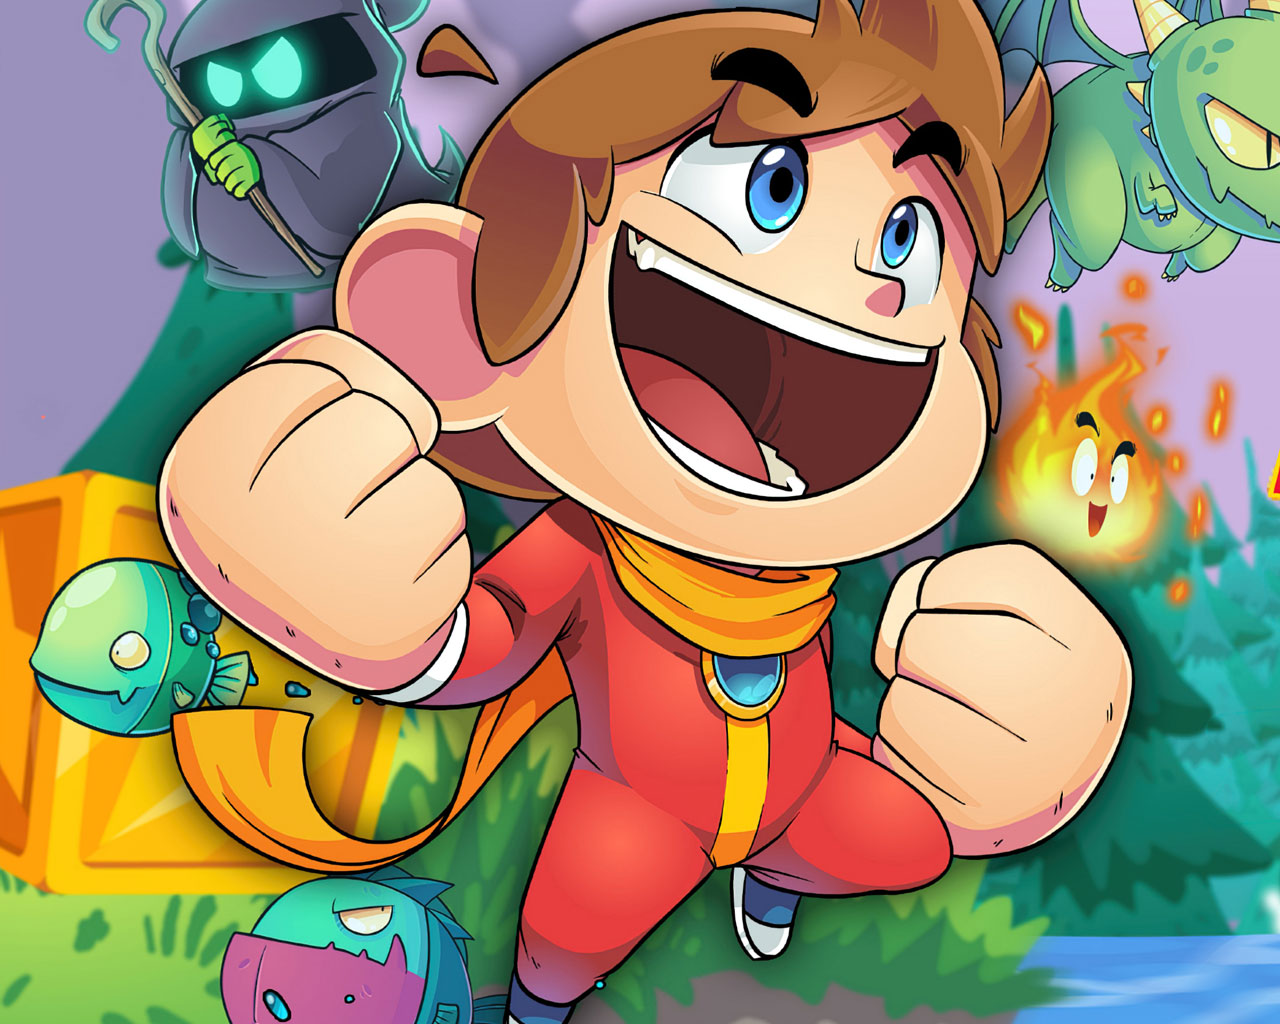 Free Alex Kidd in Miracle World DX Wallpaper in 1280x1024